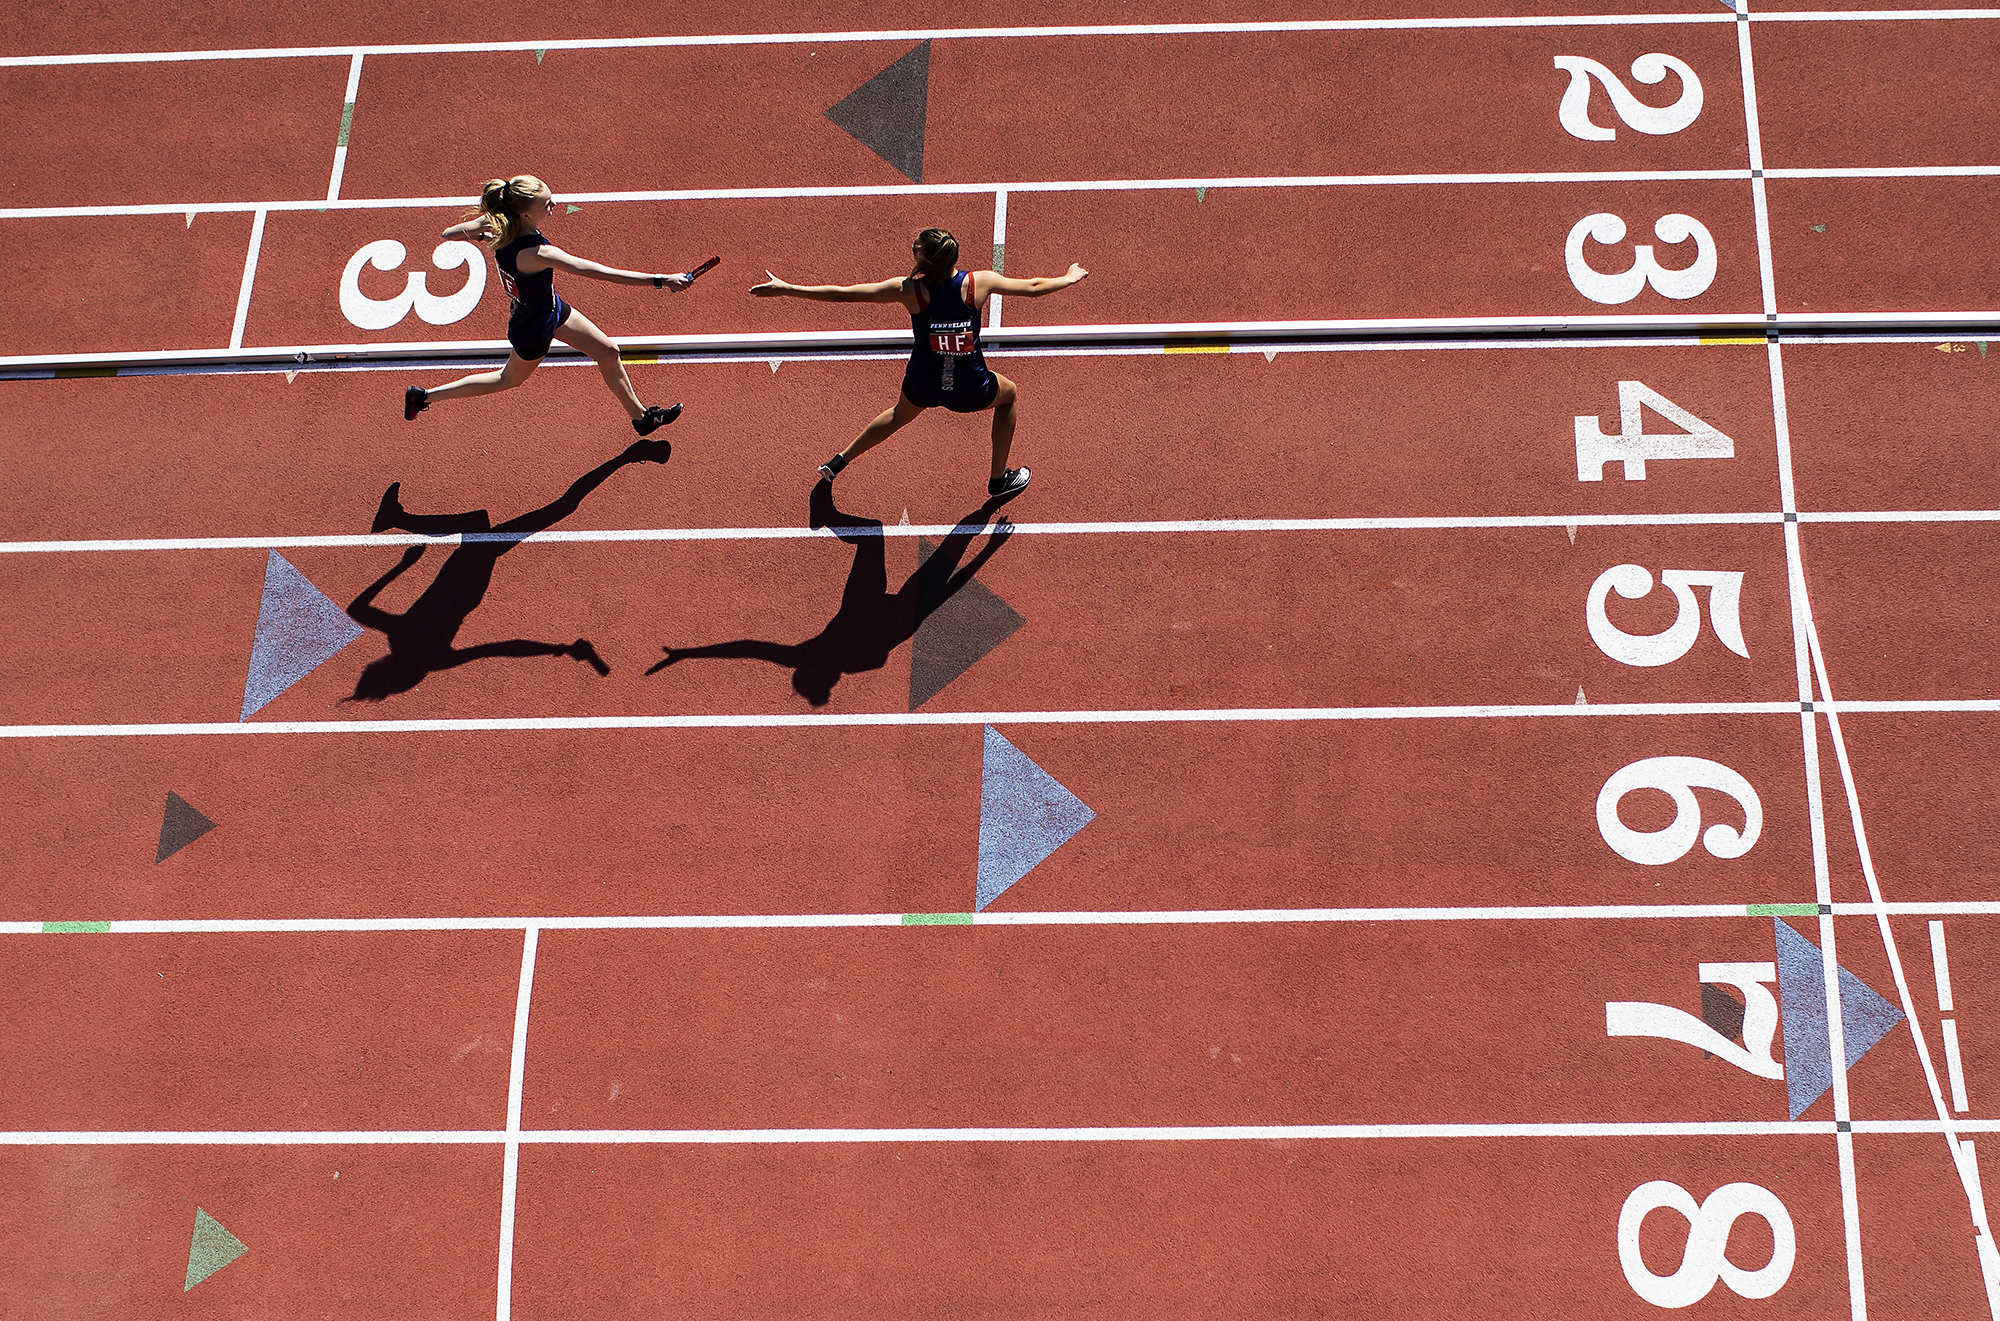 Overhead view of one runner on a track passing a baton to another.